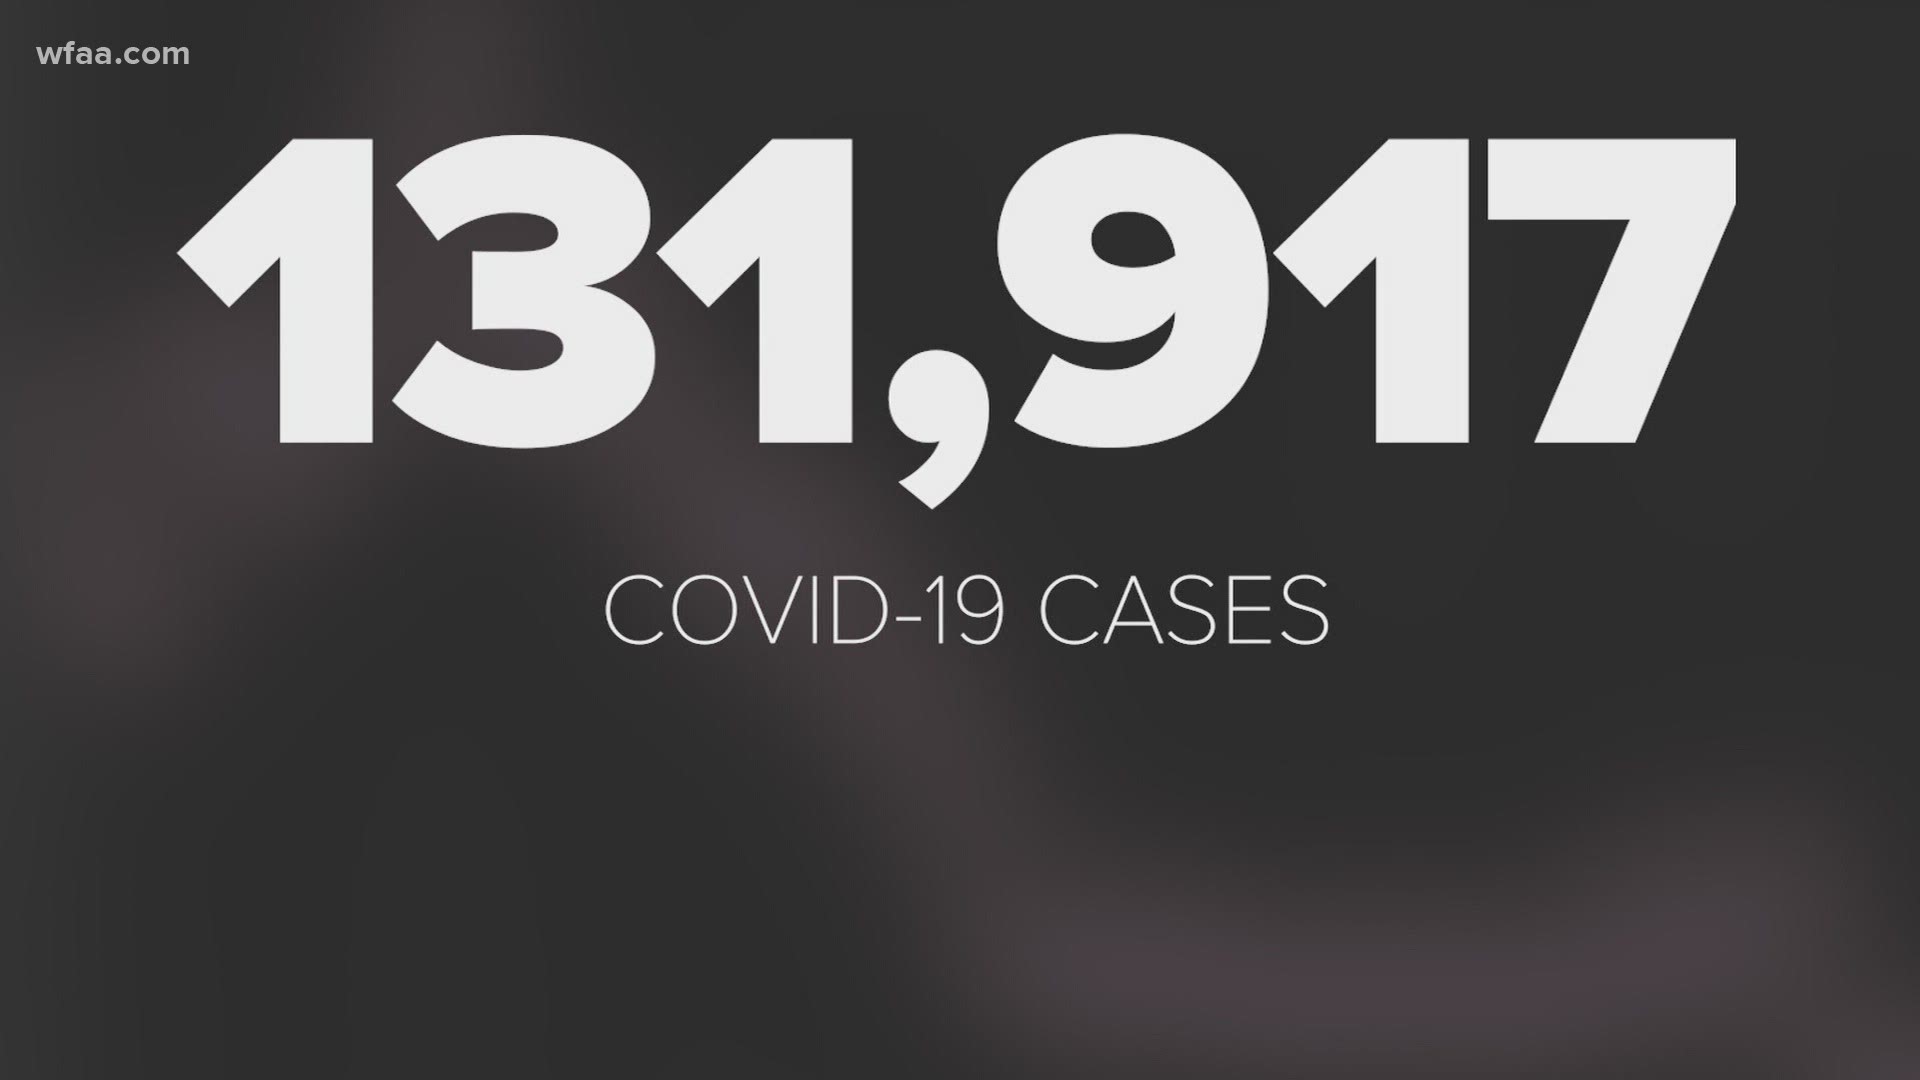 Texas has seen a surge in new coronavirus cases in June. The positivity rate has increased. More people are hospitalized. And daily cases have spiked.